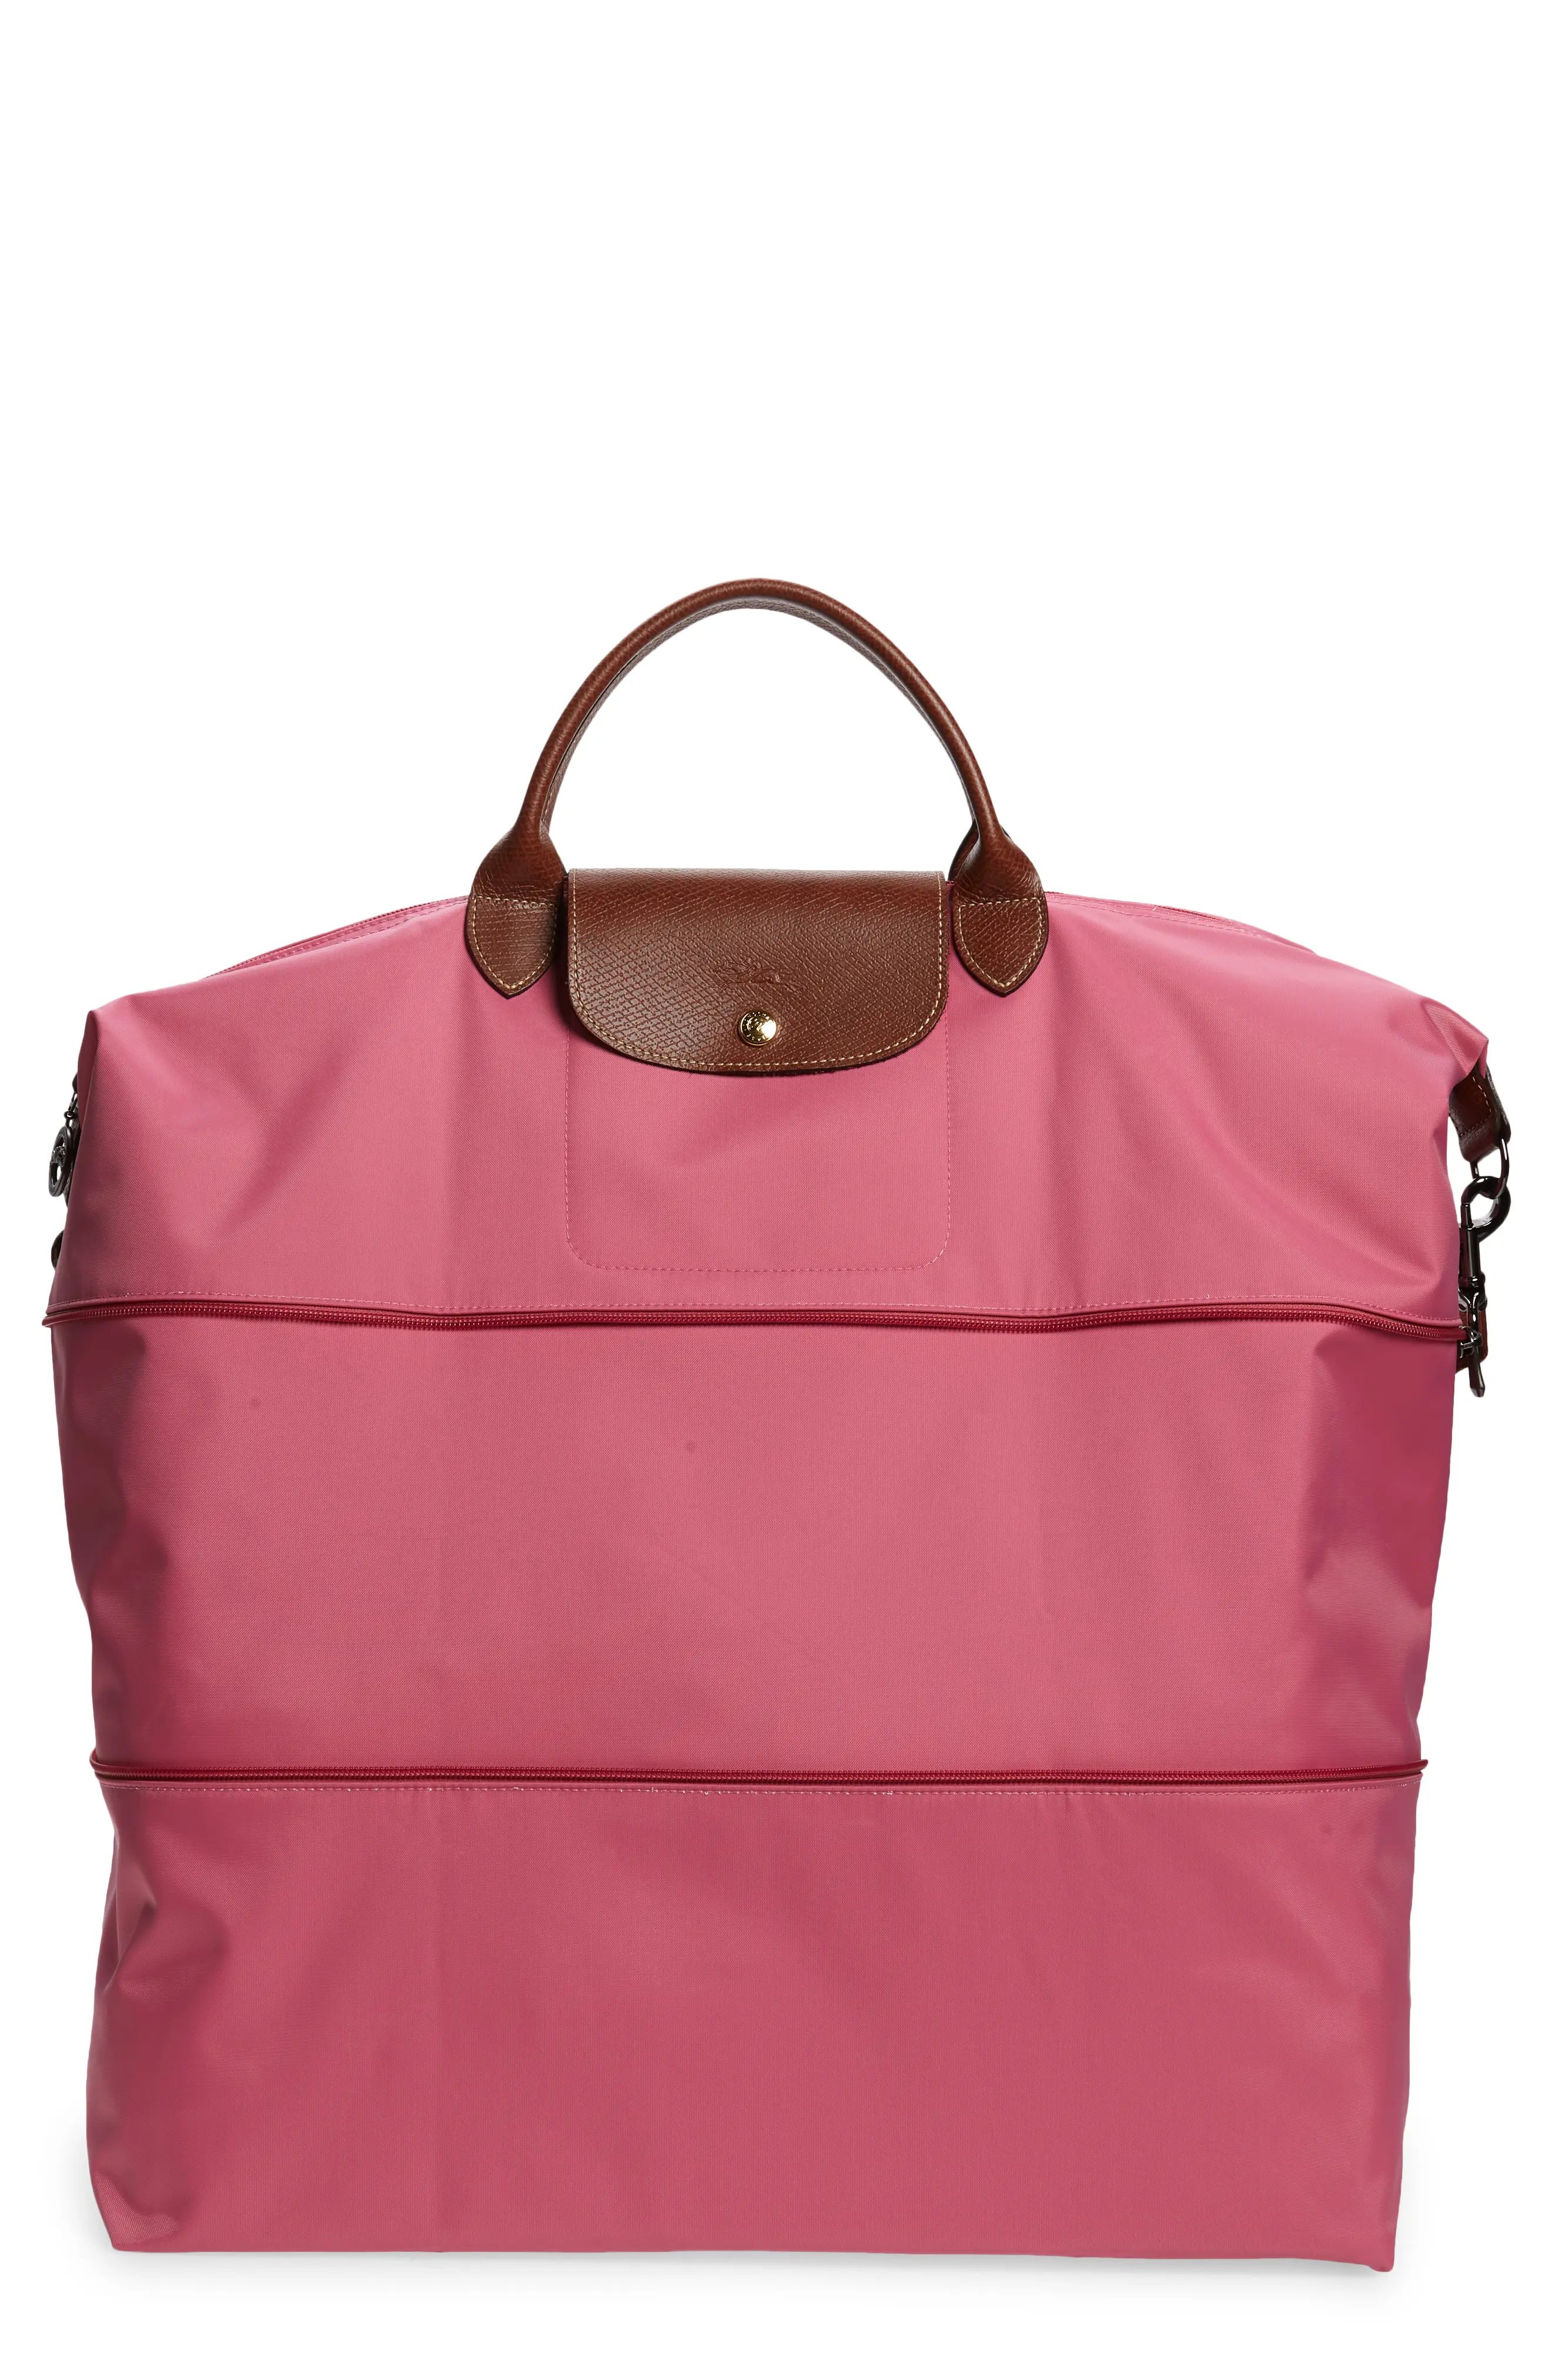 Longchamp Le Pliage Expandable Tote in Peony at Nordstrom | Nordstrom